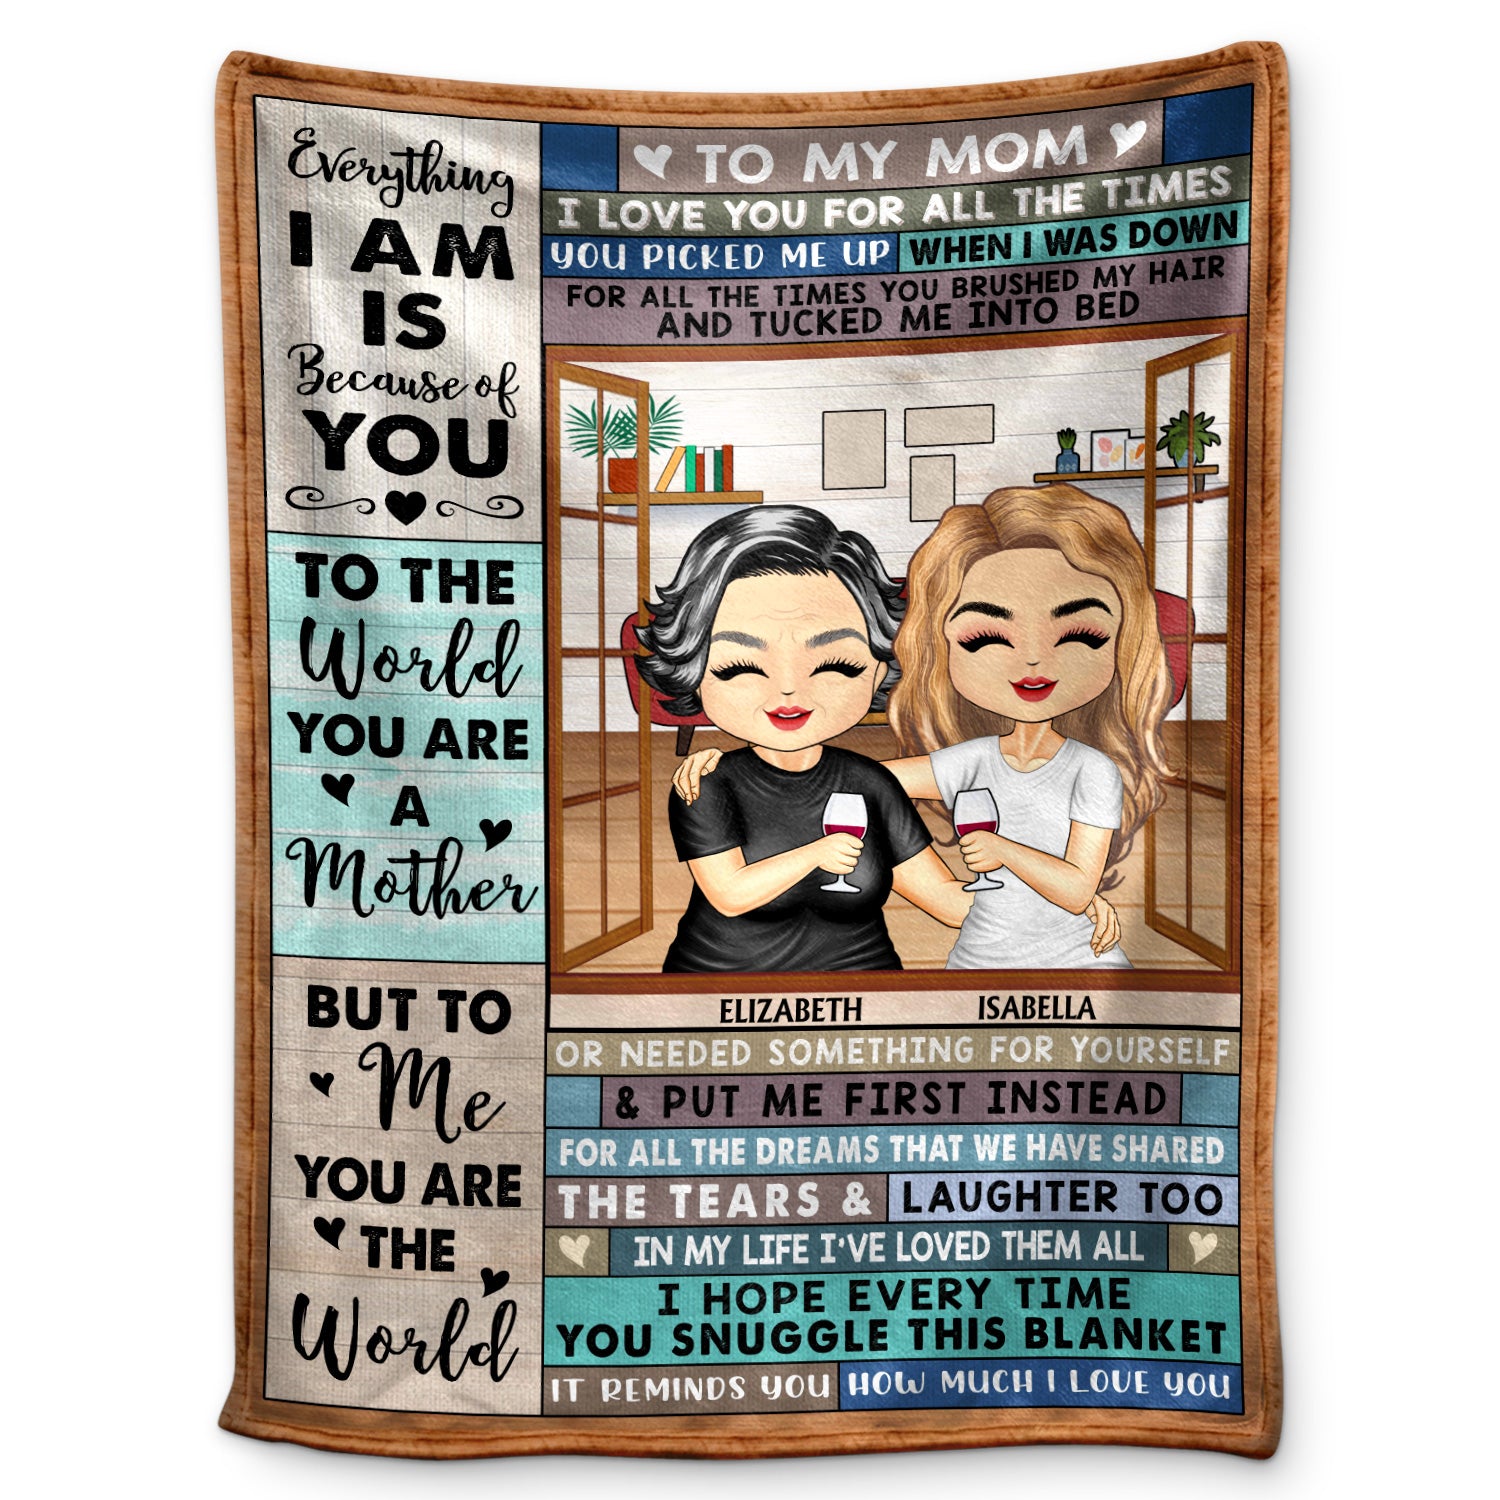 To My Mom I Love You For All The Times - Birthday, Loving Gift For Children, Kids - Personalized Custom Blanket - Birthday, Loving Gift For Mommy, Mother - Personalized Custom Fleece Blanket